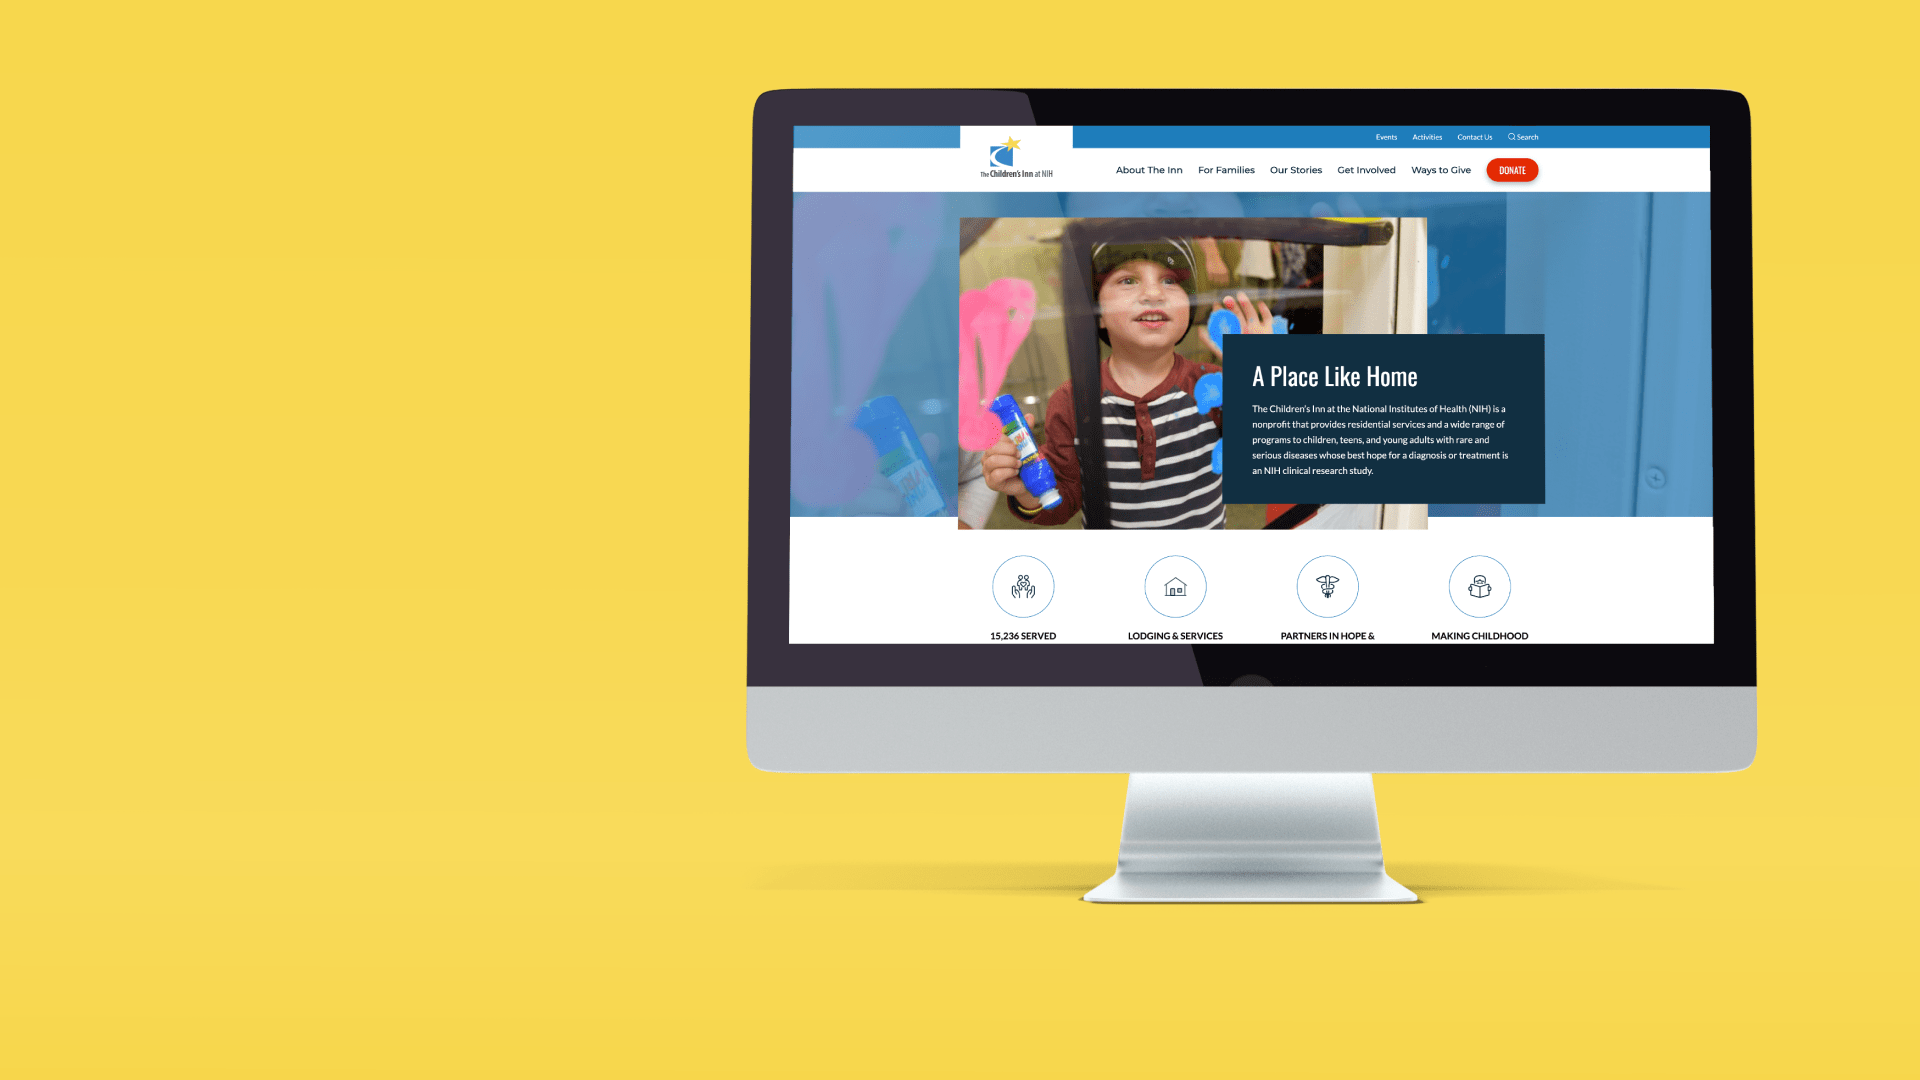 imac showing the NIH Childrens Inn homepage design on a yellow background